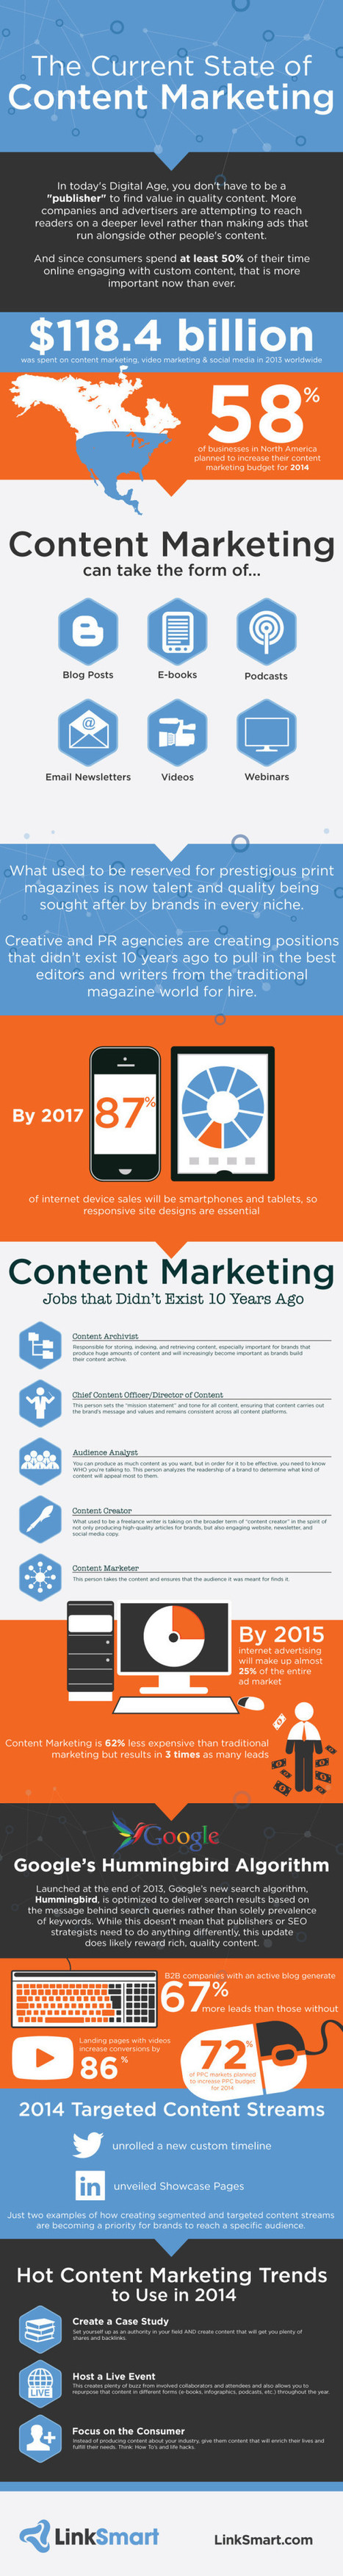 The Current State of Content Marketing 2014 - Marketing Technology Blog | Public Relations & Social Marketing Insight | Scoop.it